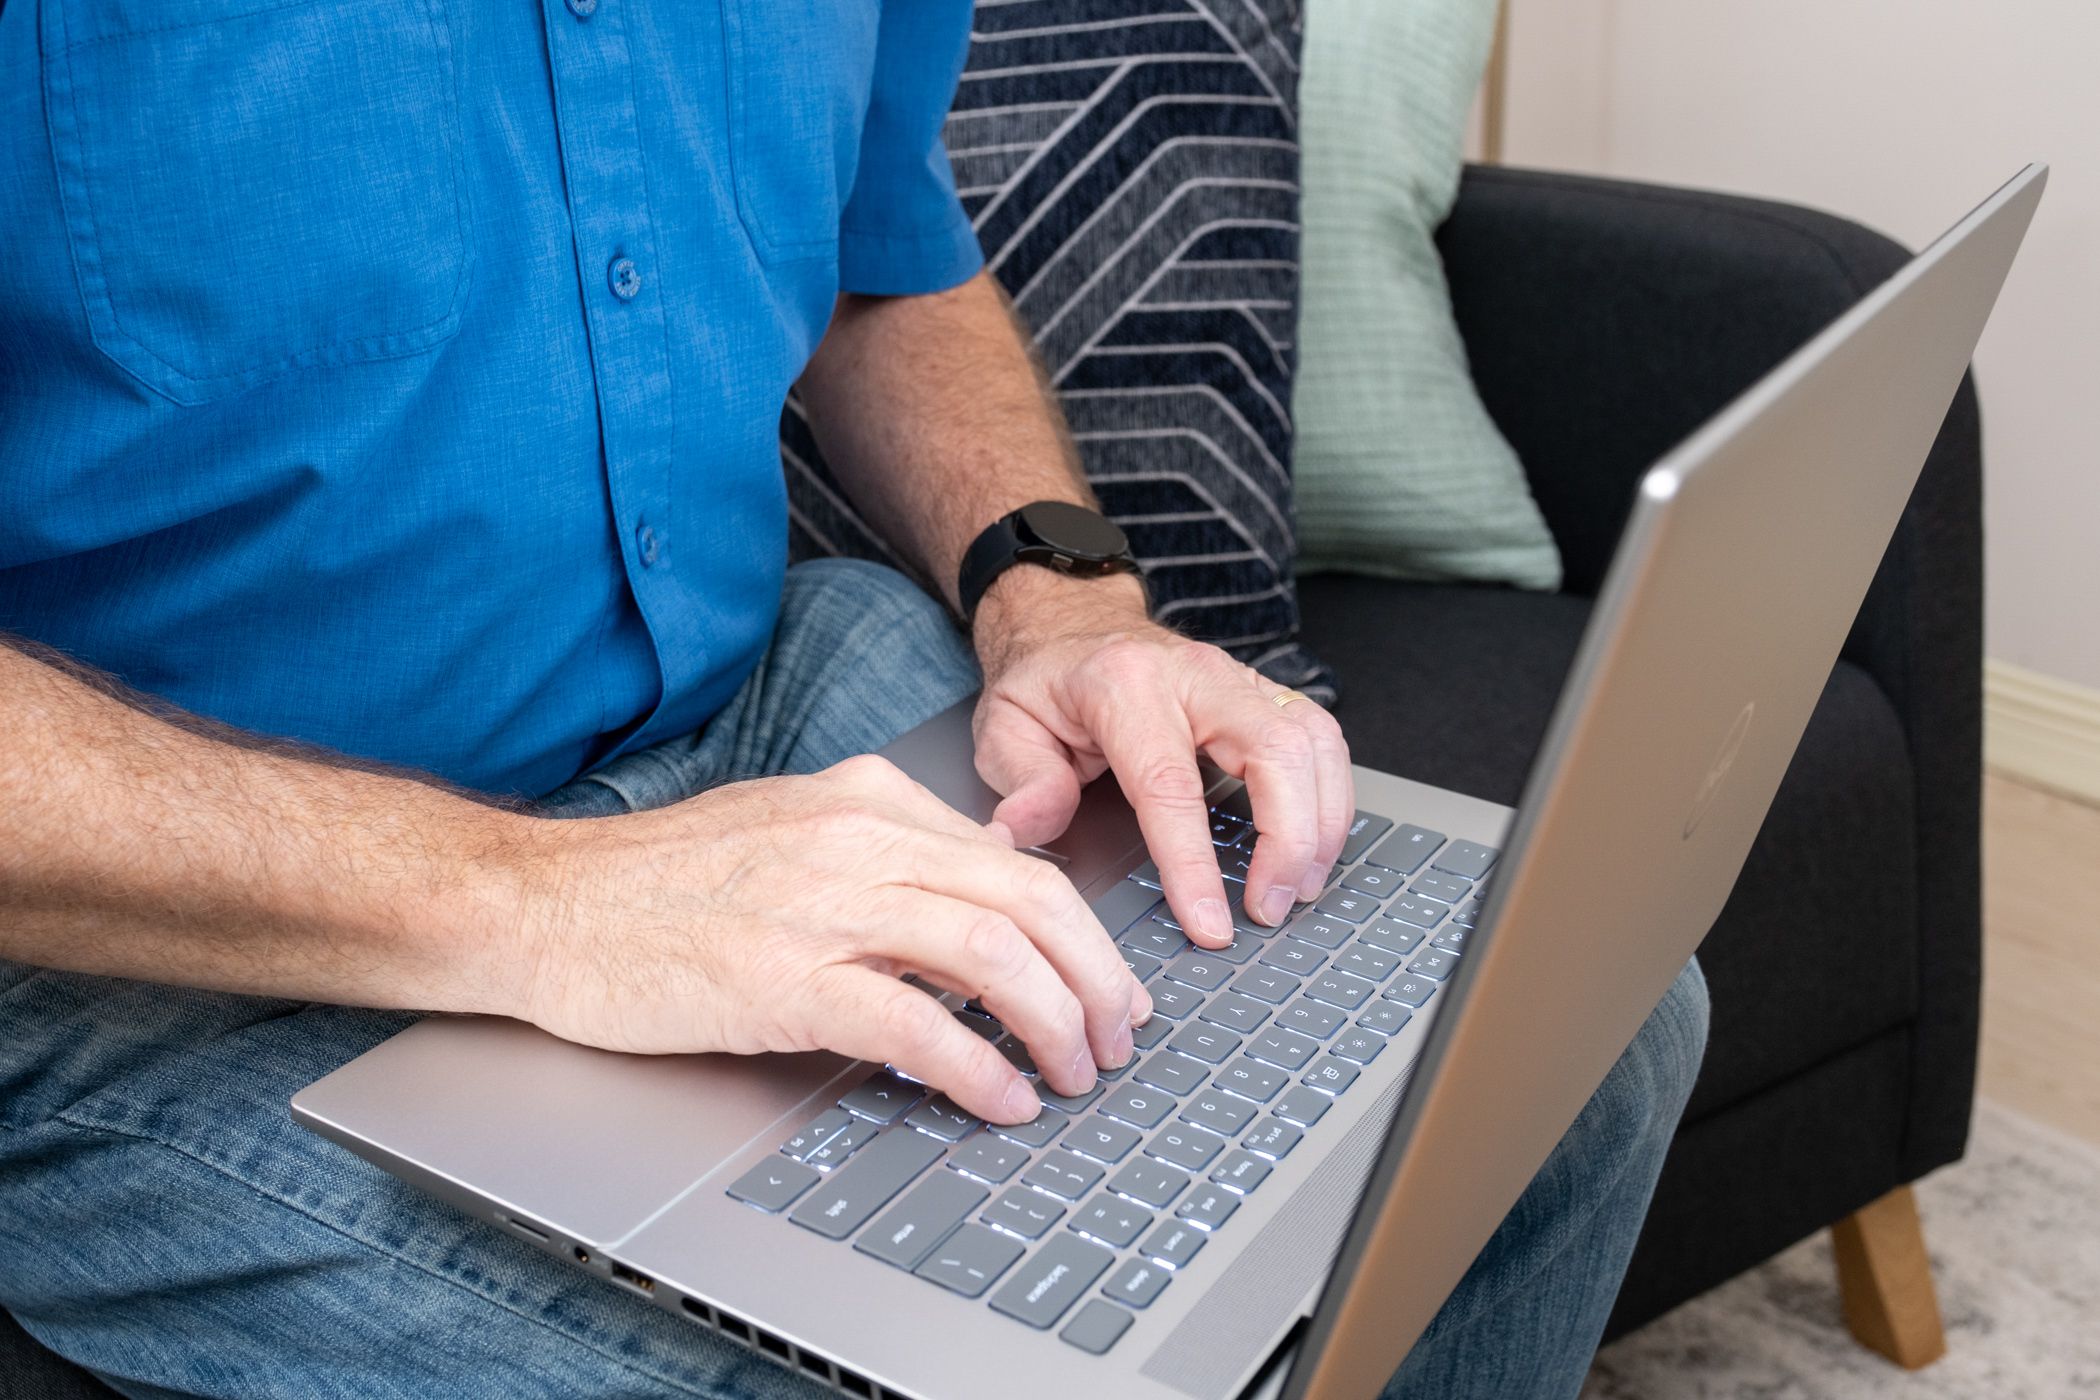 A man sitting on a couch is typing on a silver laptop.